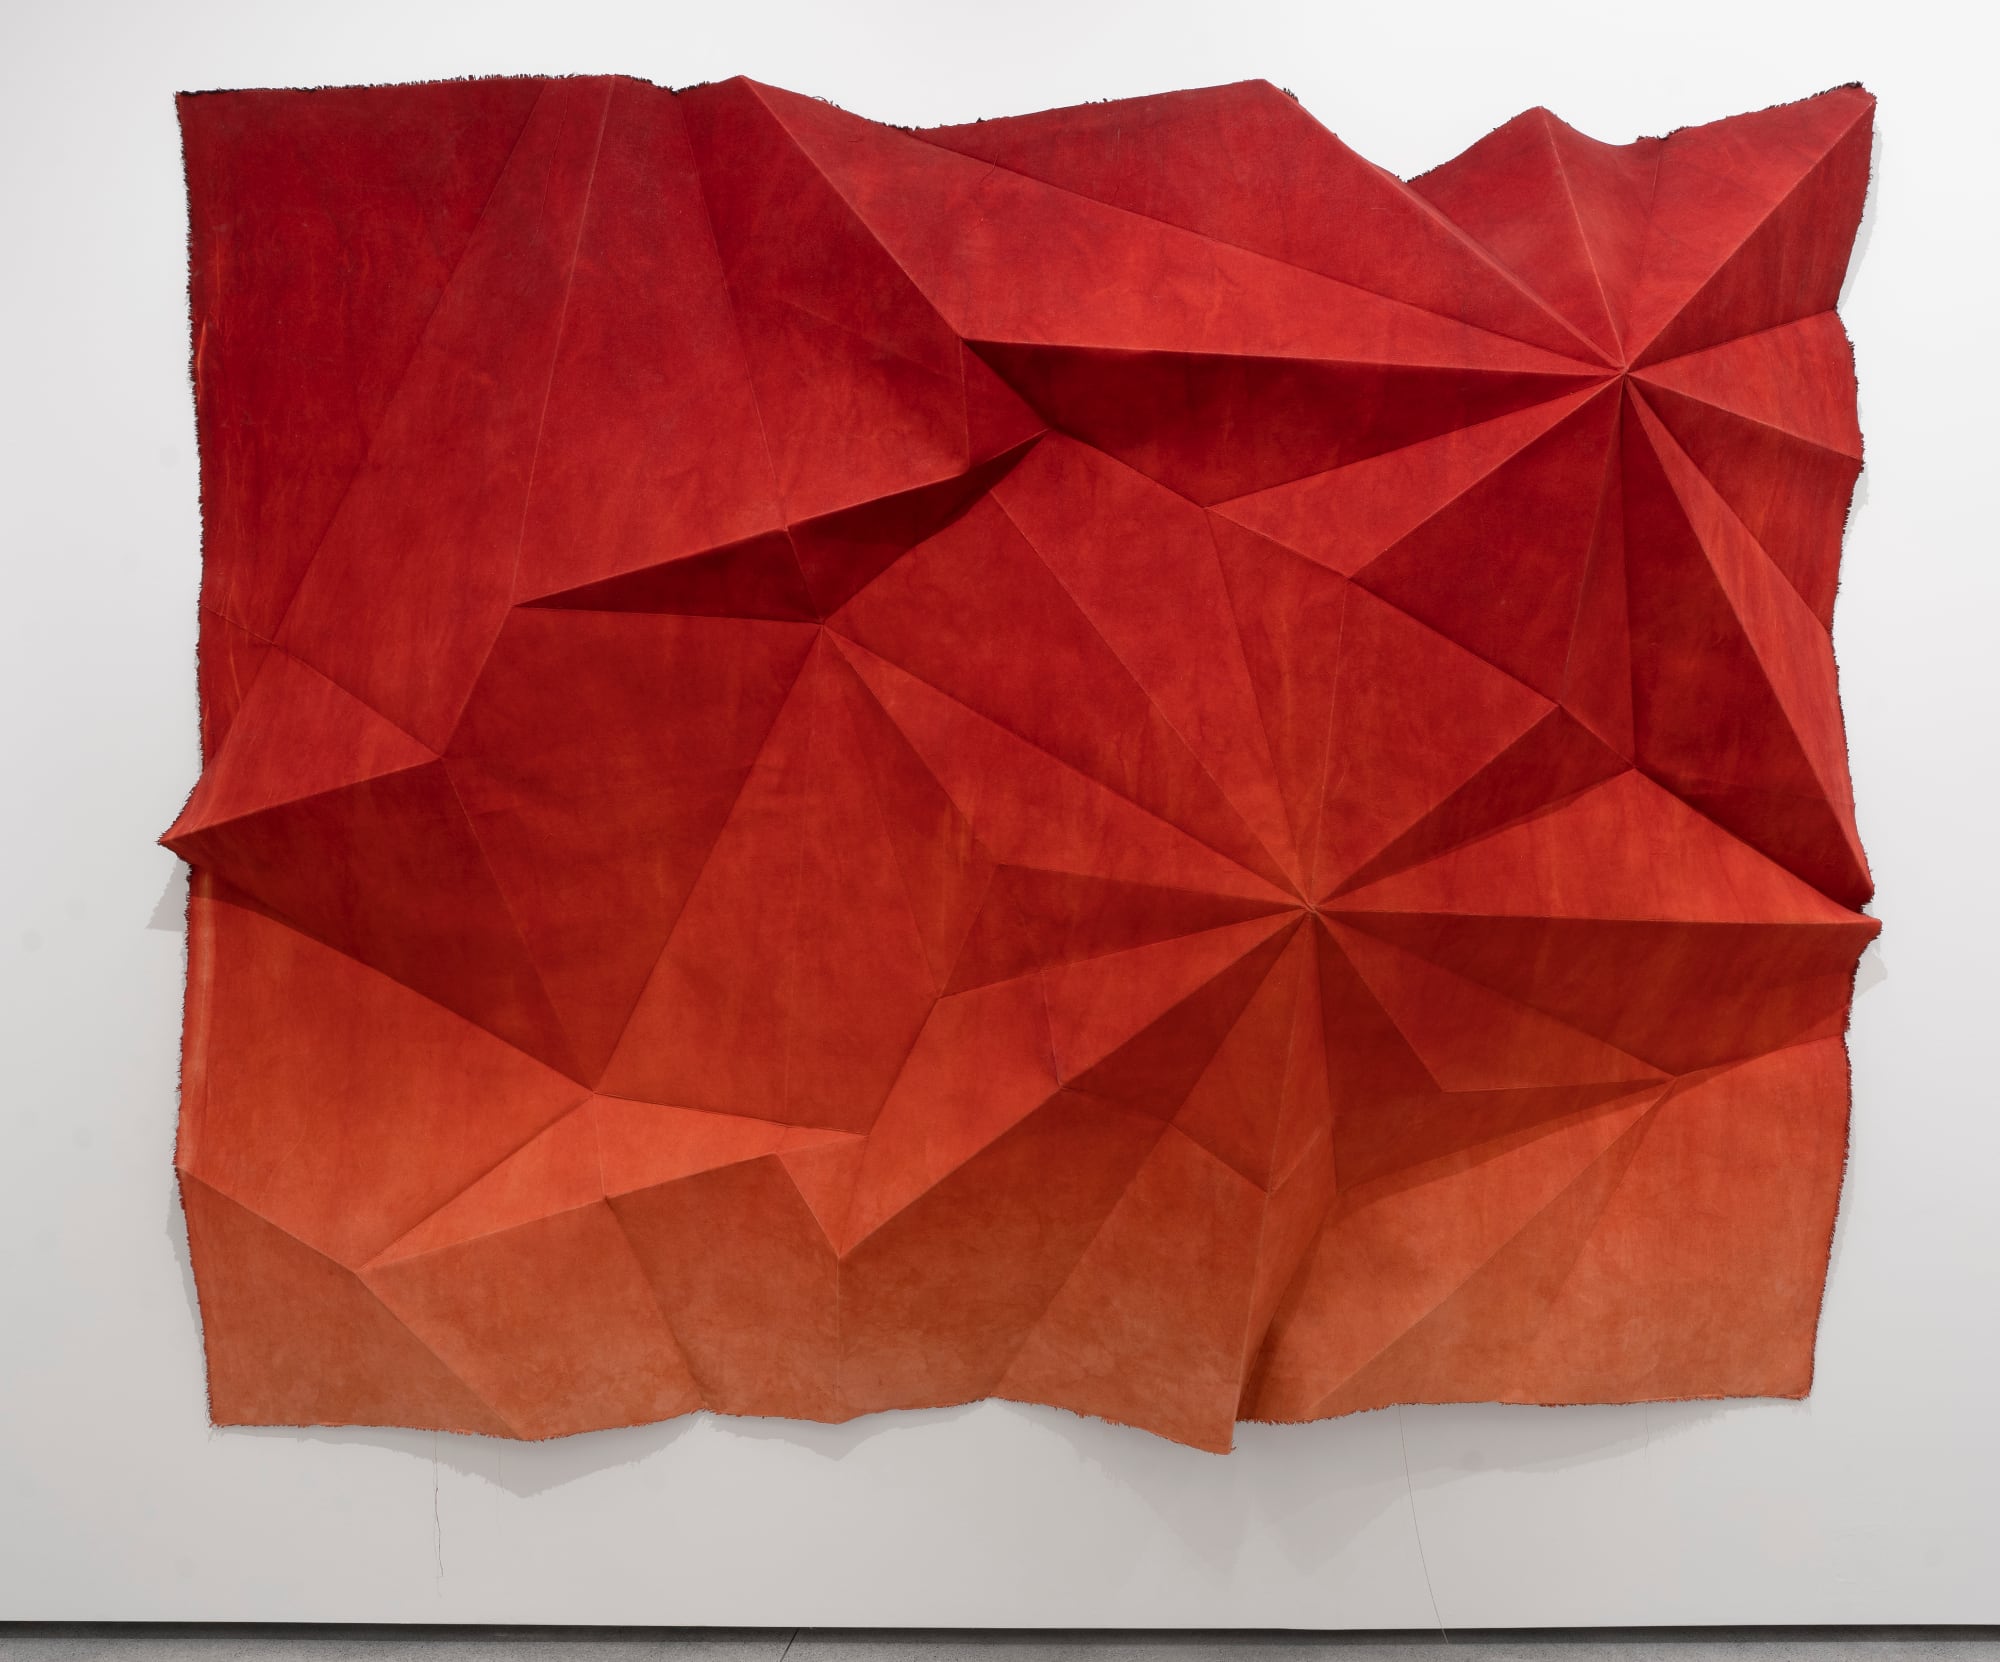 a large folded sheet in red on a gallery wall